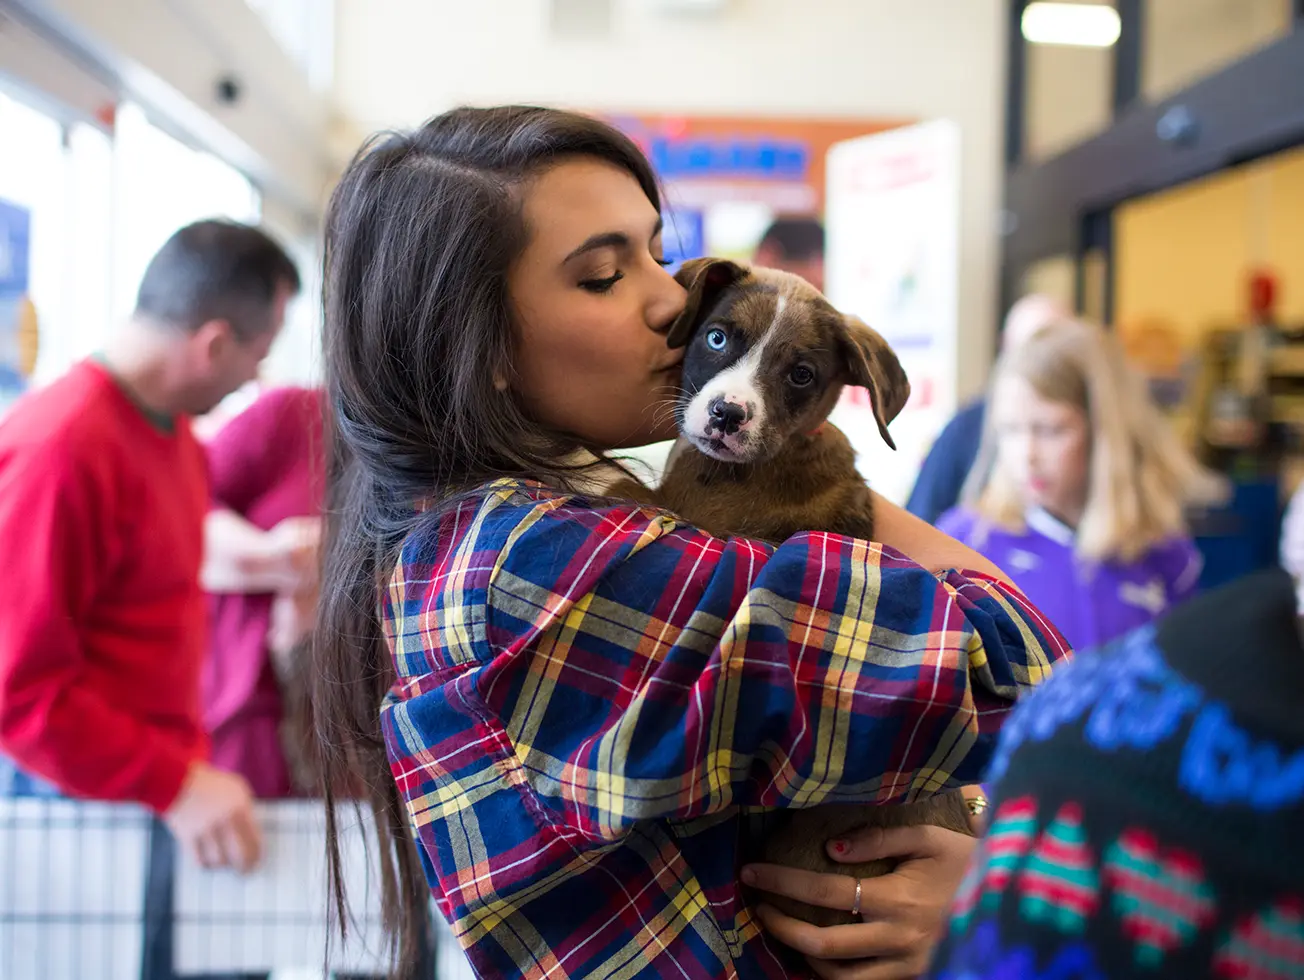 image of a woman in a plaid shirt kissing a puppy's face